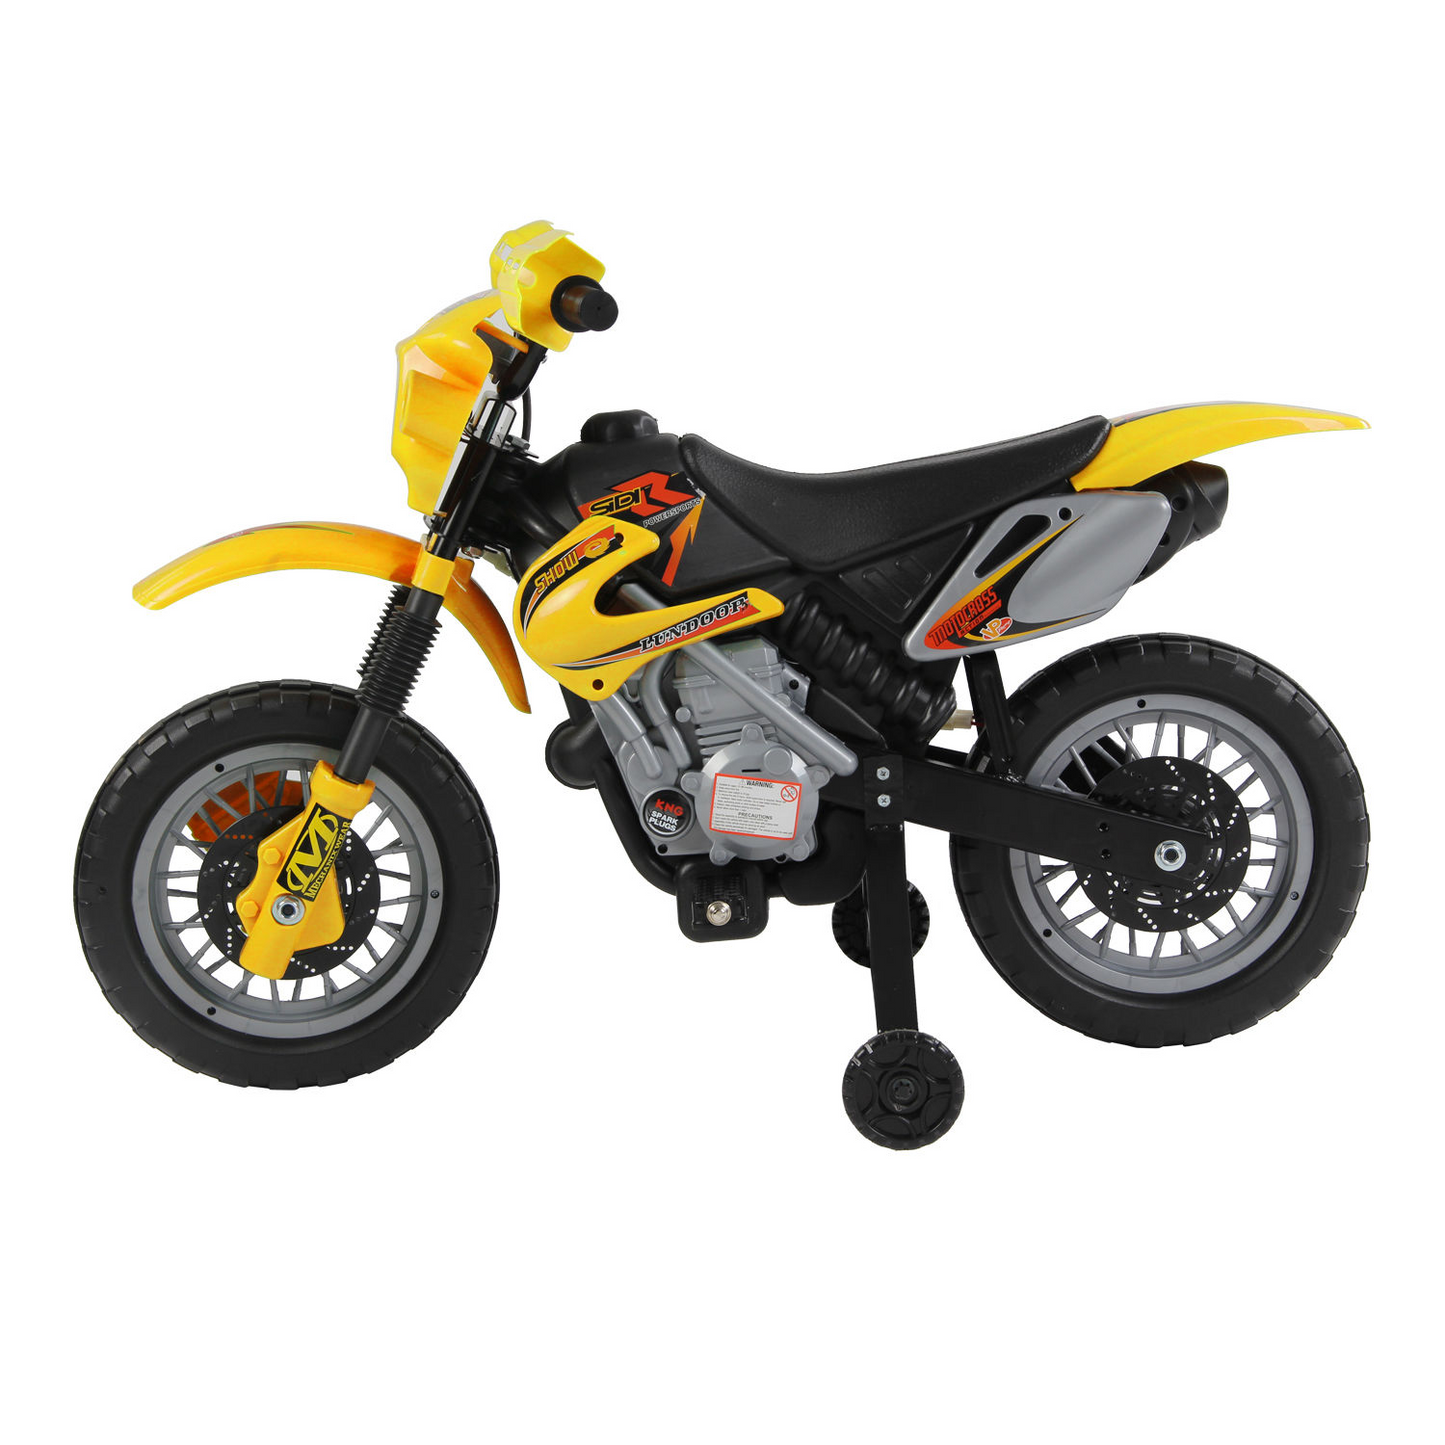 HOMCOM 6V Kids Child Electric Motorbike Ride on Motorcycle Scooter Children Toy Gift for 3-6 Years (Yellow)